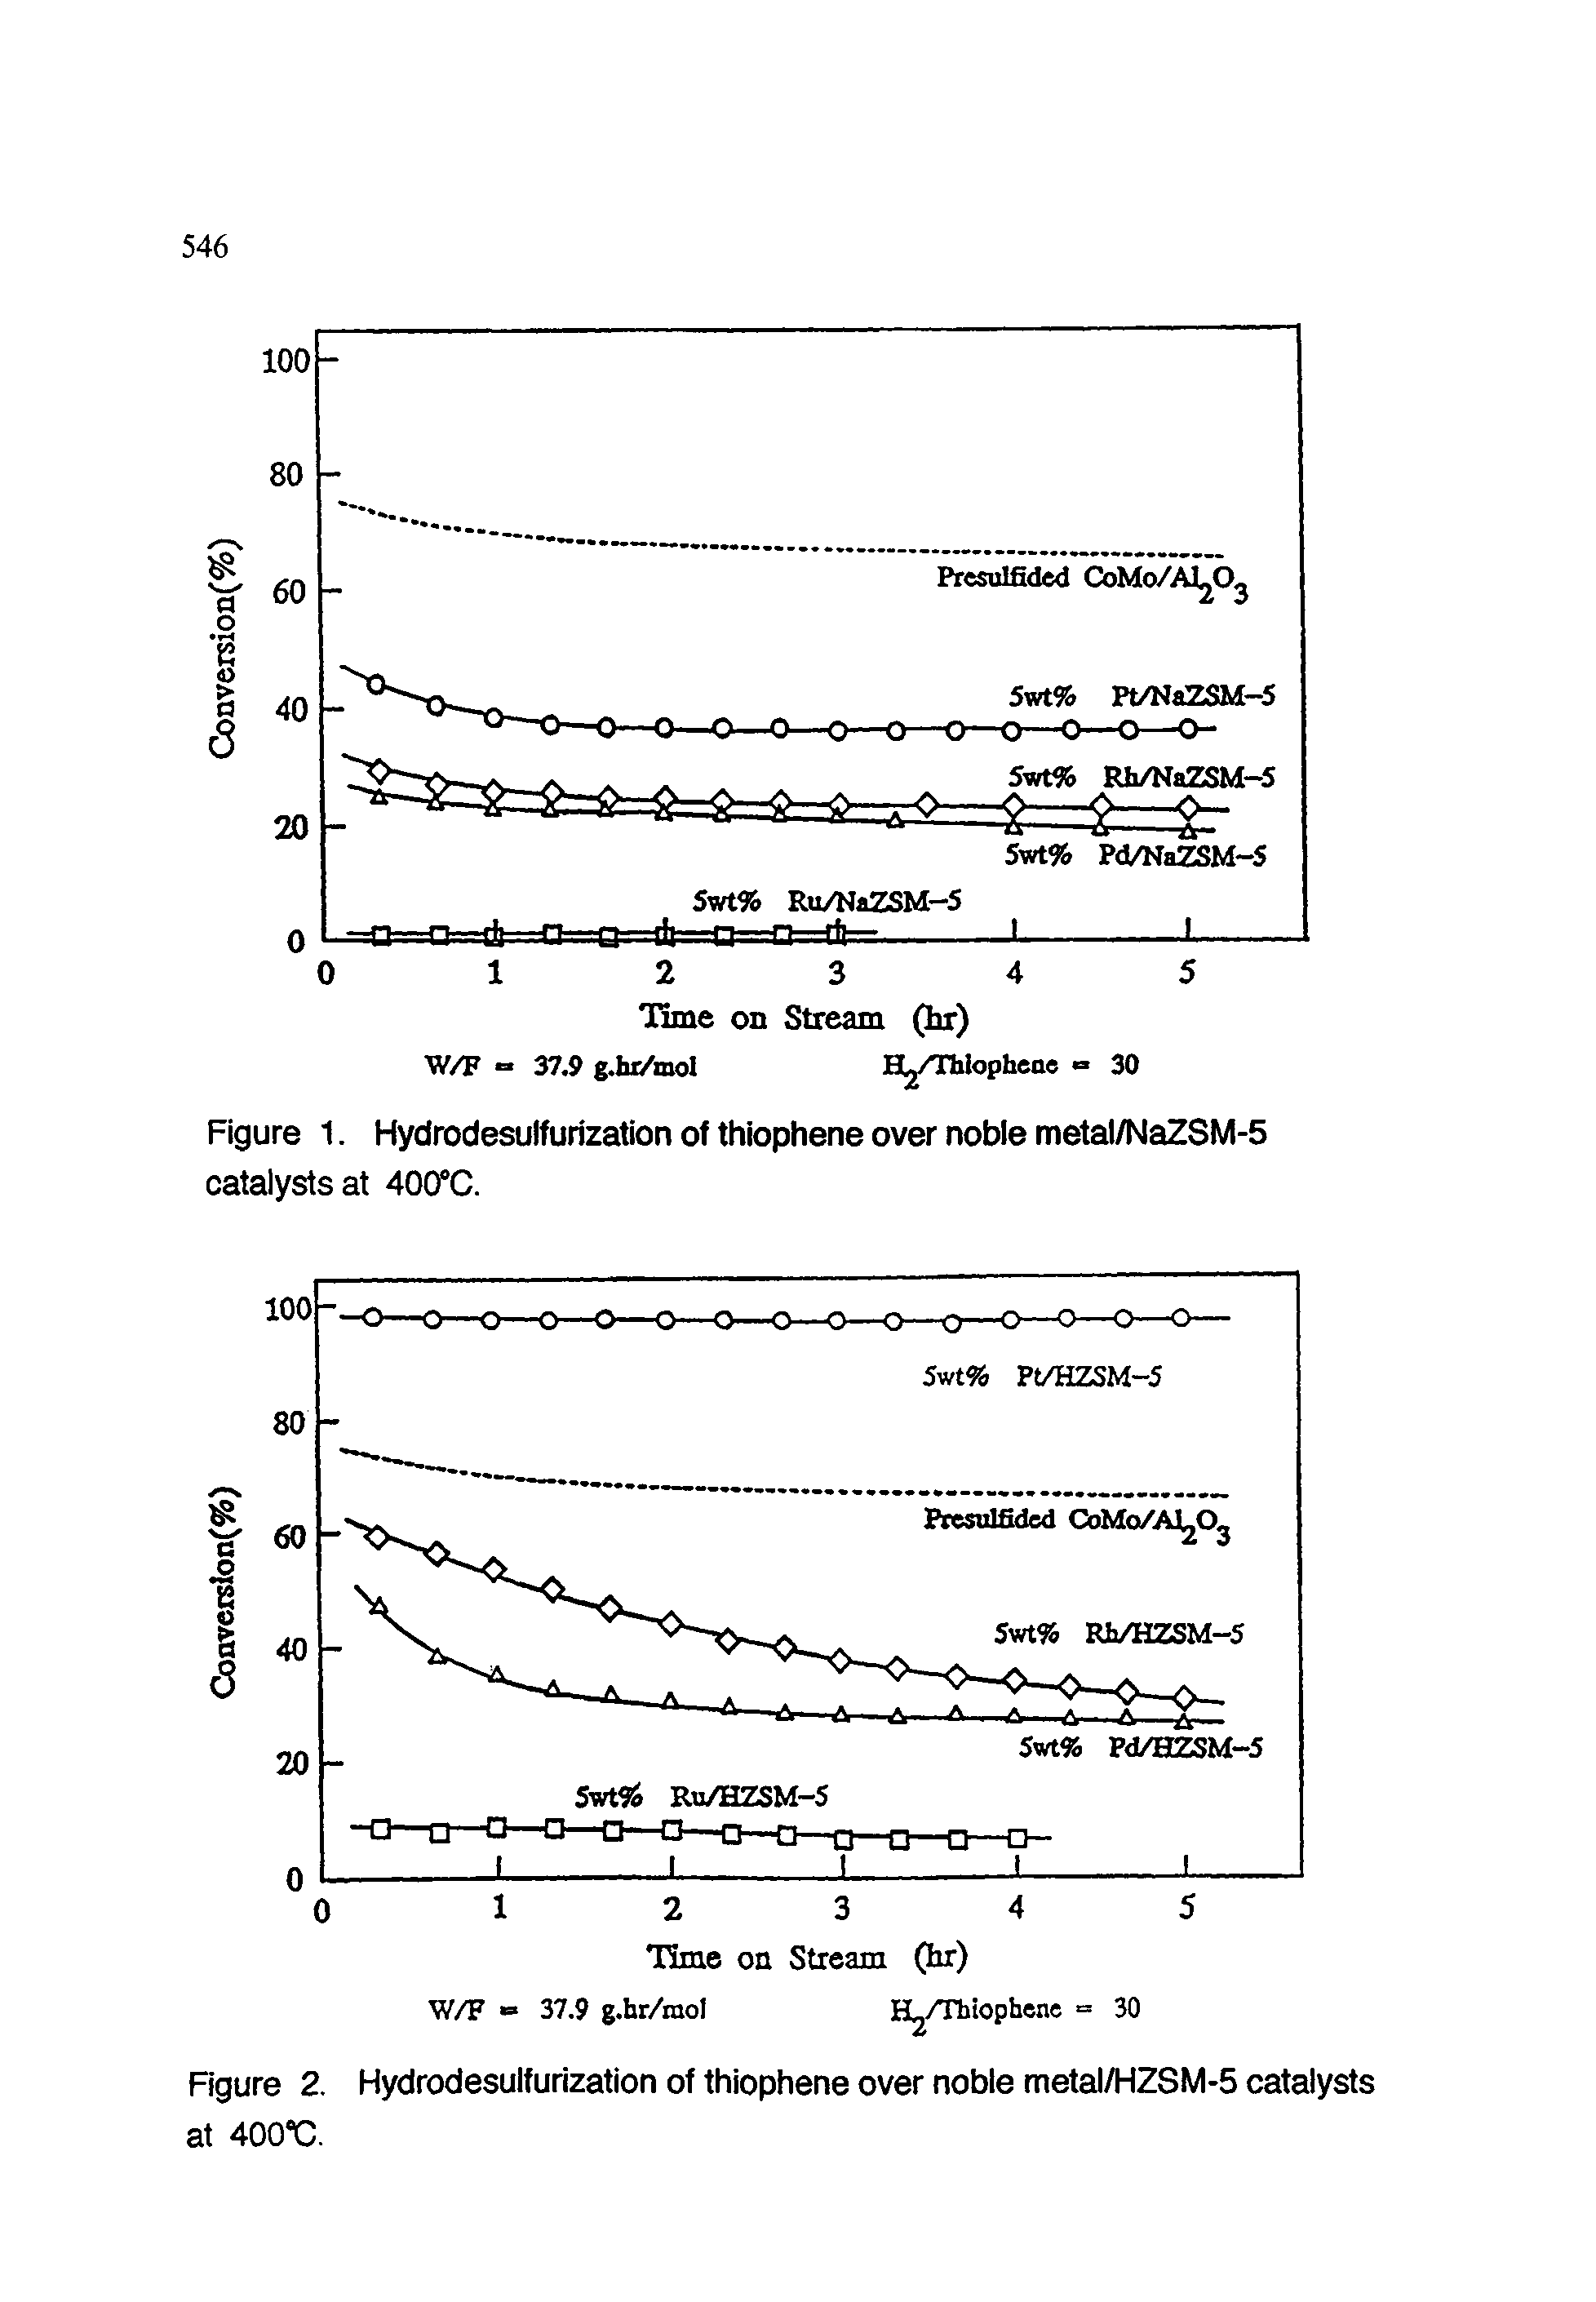 Figure 1. Hydrodesulfurization of thiophene over noble metal/NaZSM-5 catalysts at 400°C.